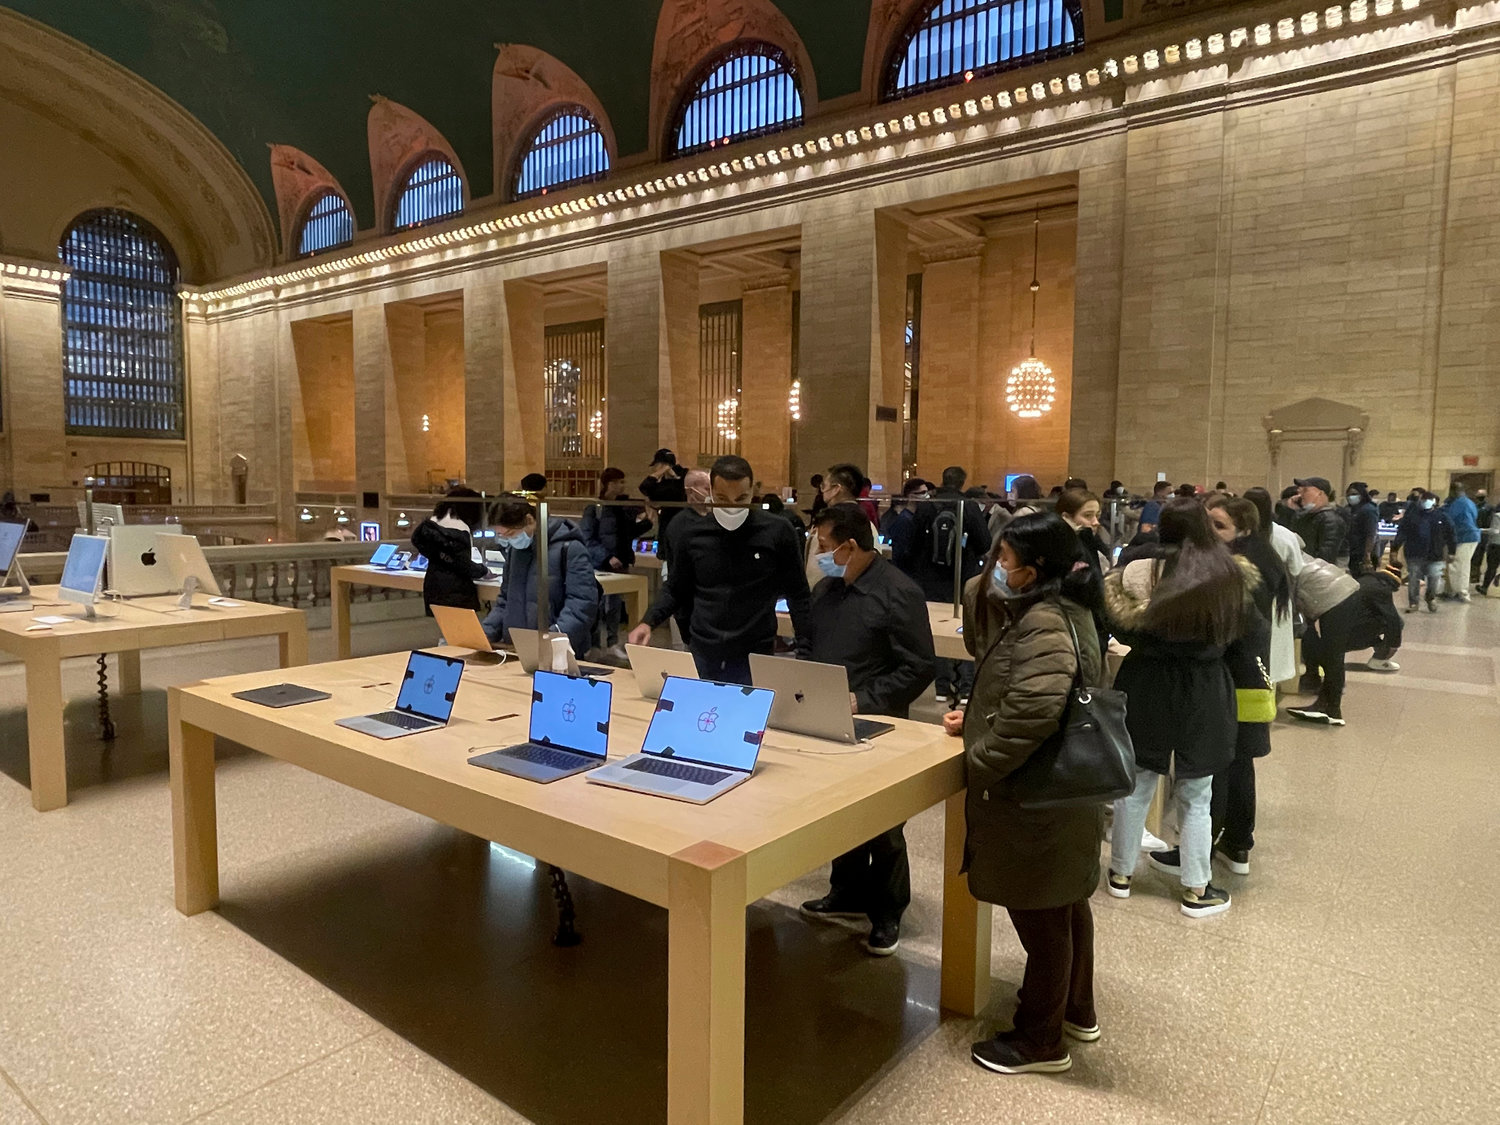 Employees and customers at Apple's Grand Central Terminal retail store last fall. Apple retail workers at the flagship store are said to be in talks to unionize, looking to establish higher wages and job benefits.